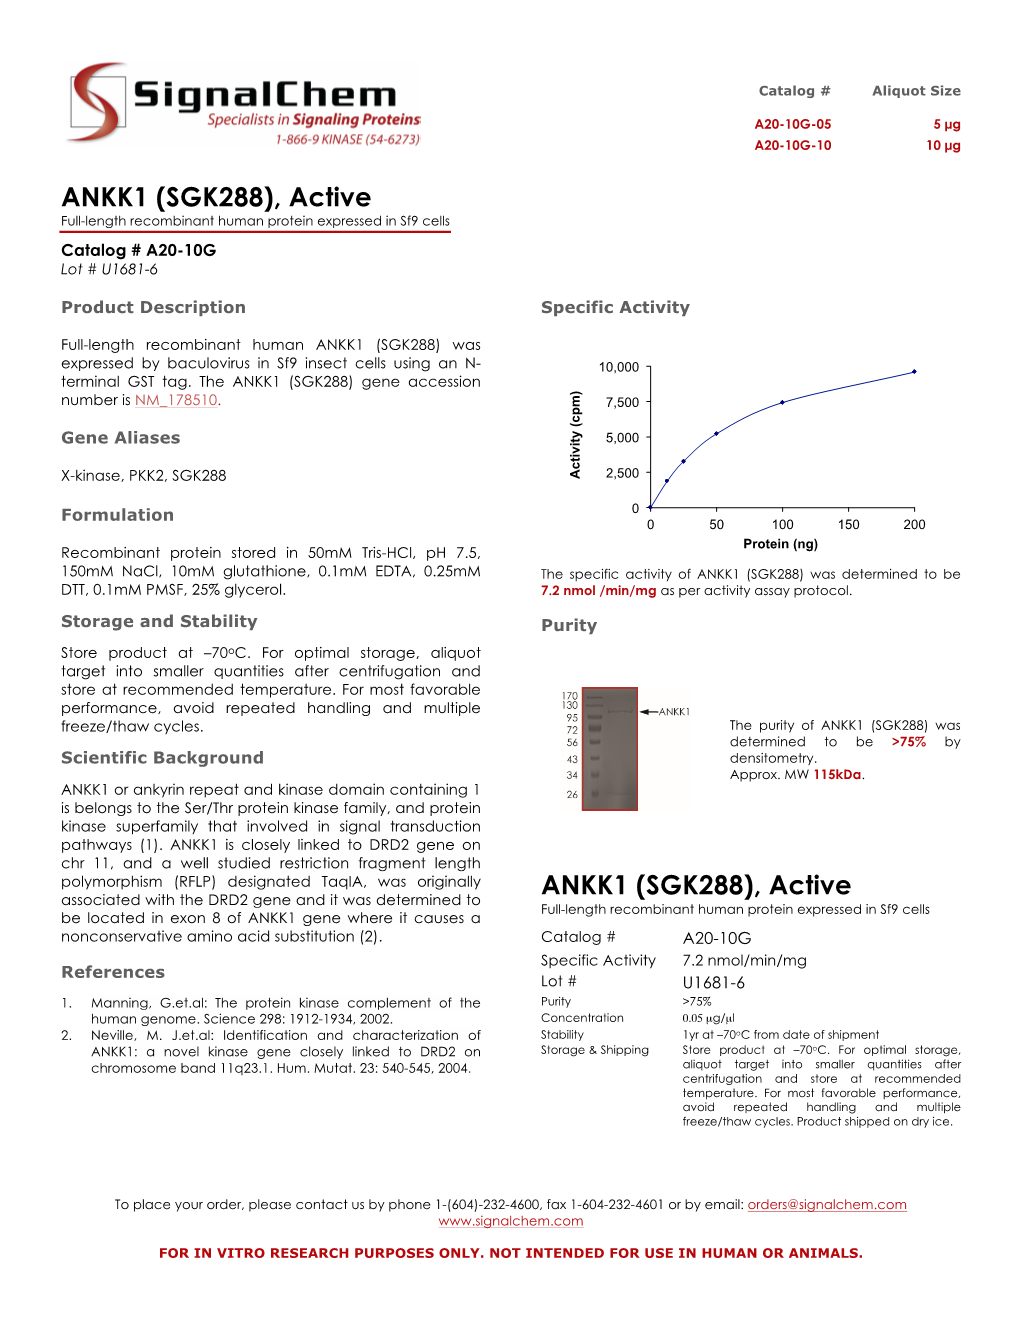 ANKK1 (SGK288), Active Full-Length Recombinant Human Protein Expressed in Sf9 Cells